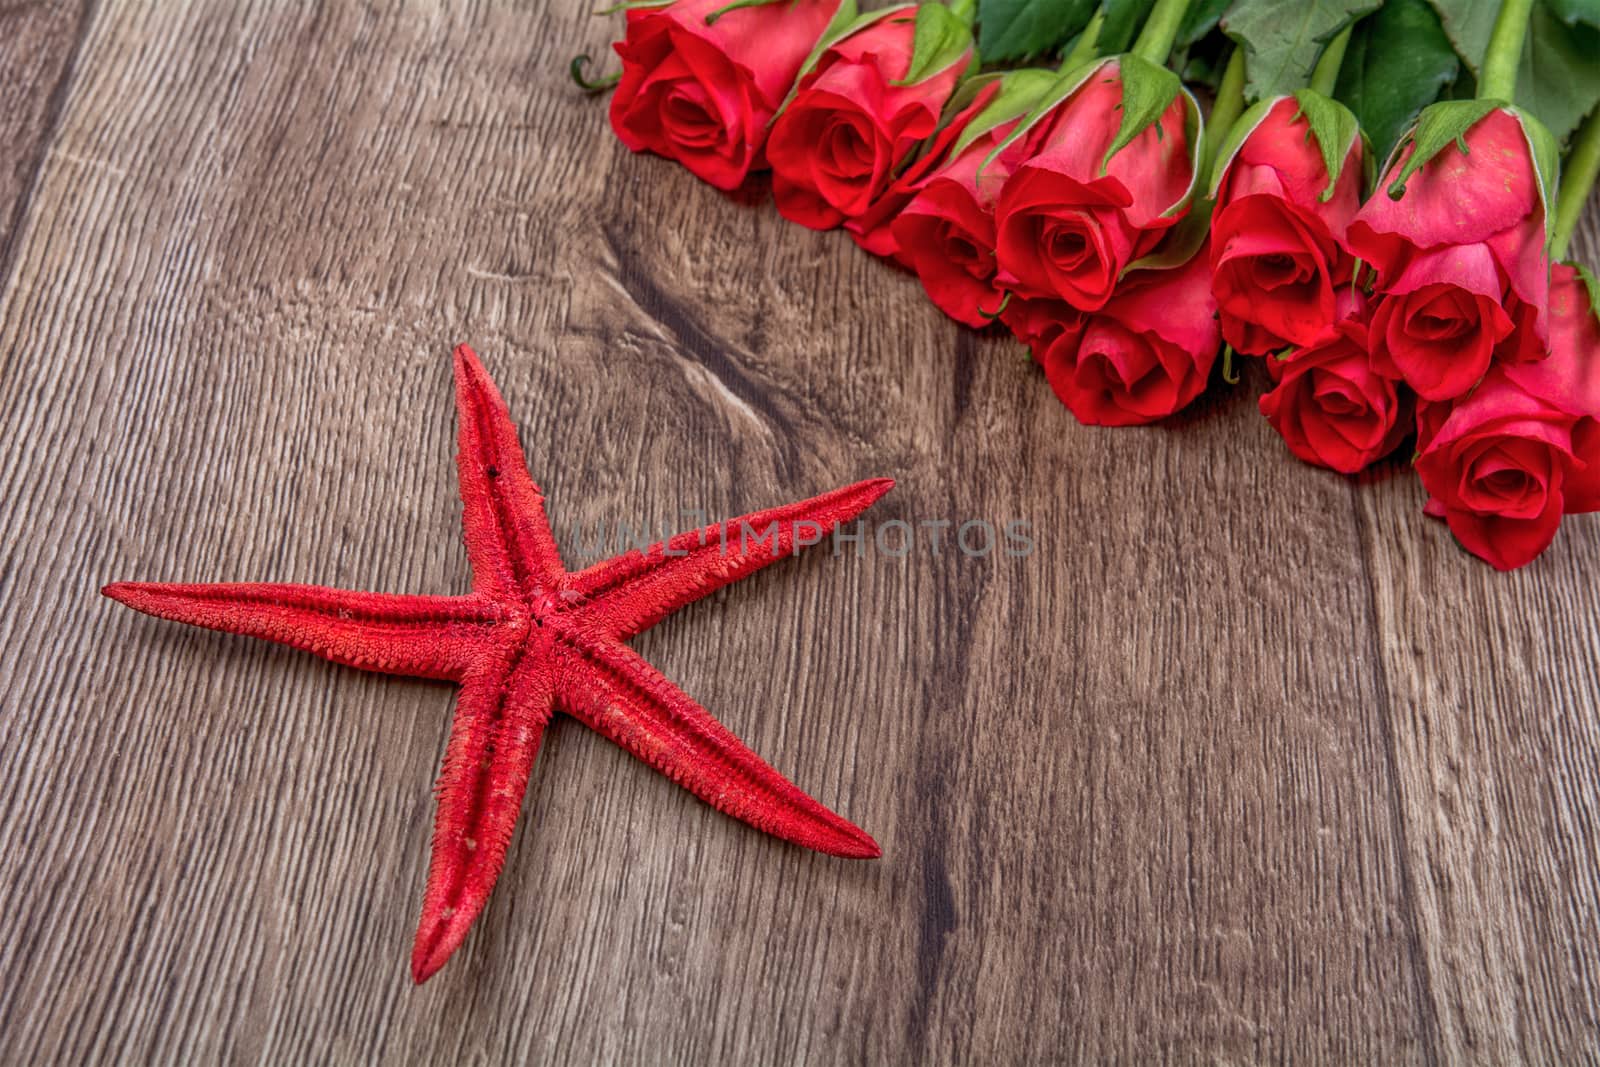 Red starfish and roses on a wooden background by neryx